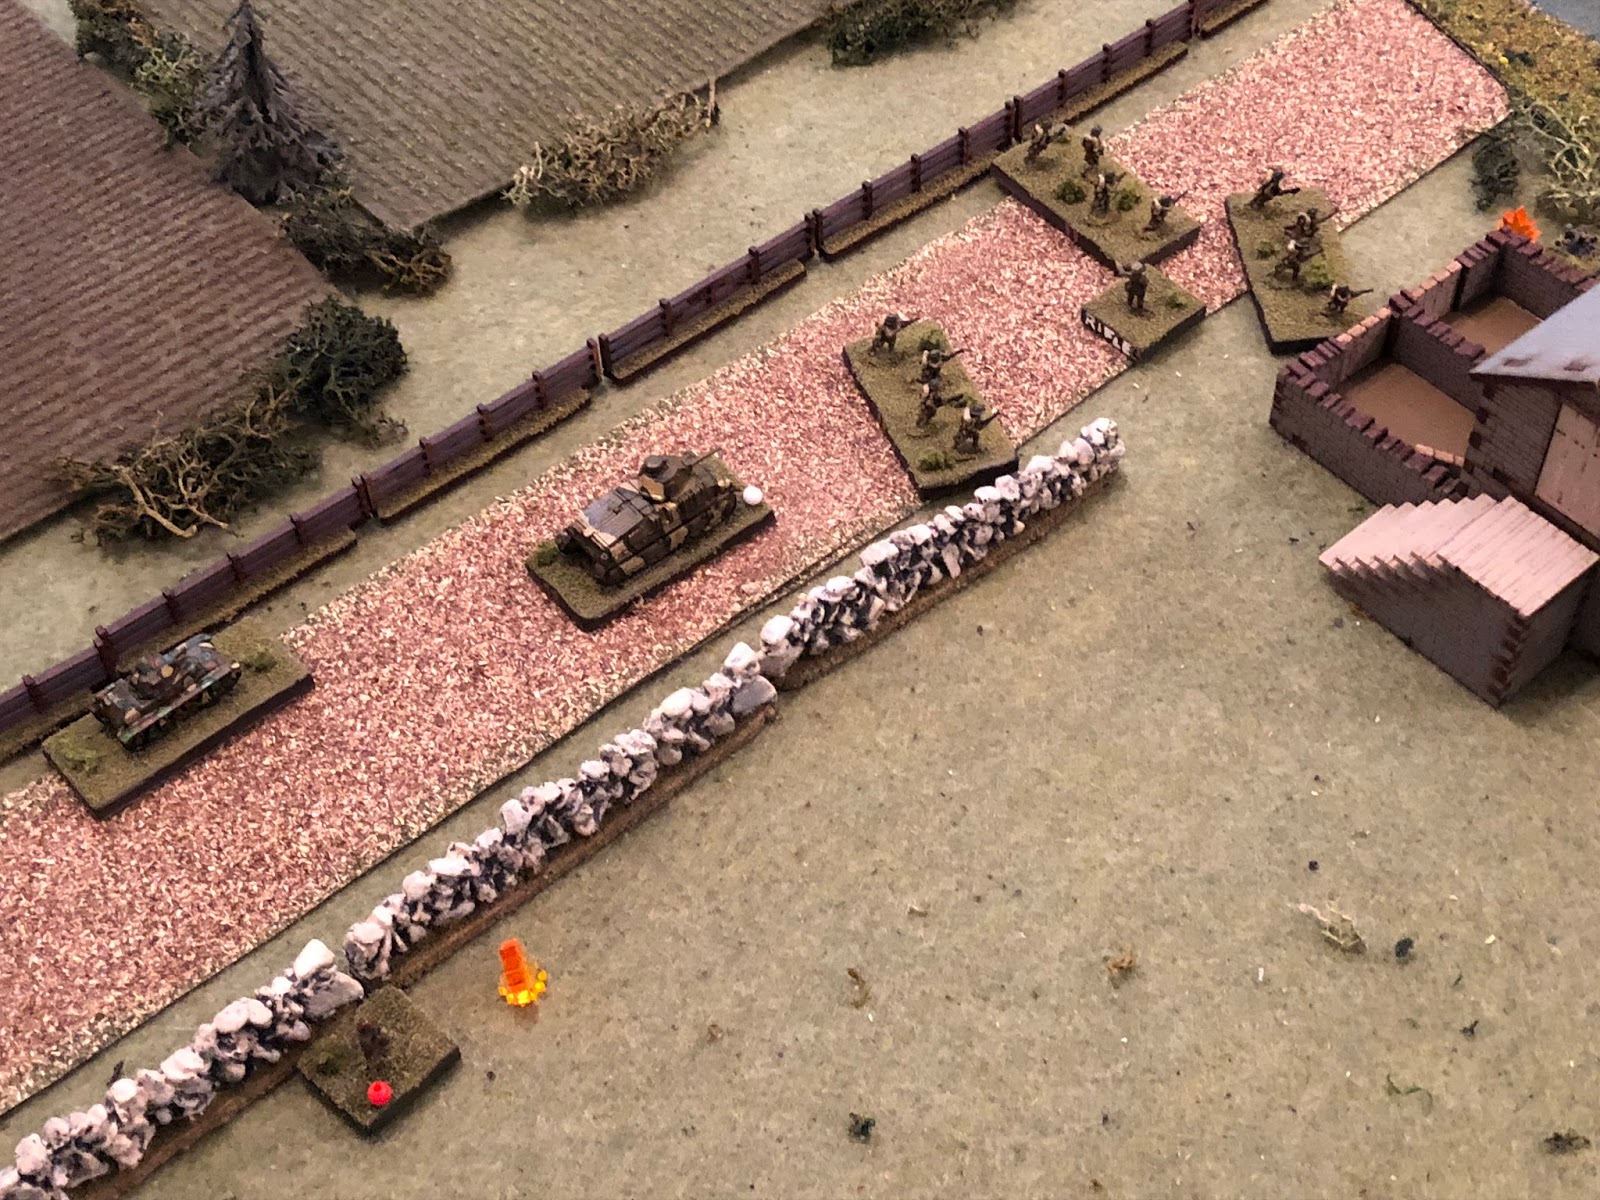  The French 2nd Platoon, looking to press their advantage, push east down main street (top center/right), looking to eliminate the German engineers, take the tollkeeper's house, and push across the ford. 